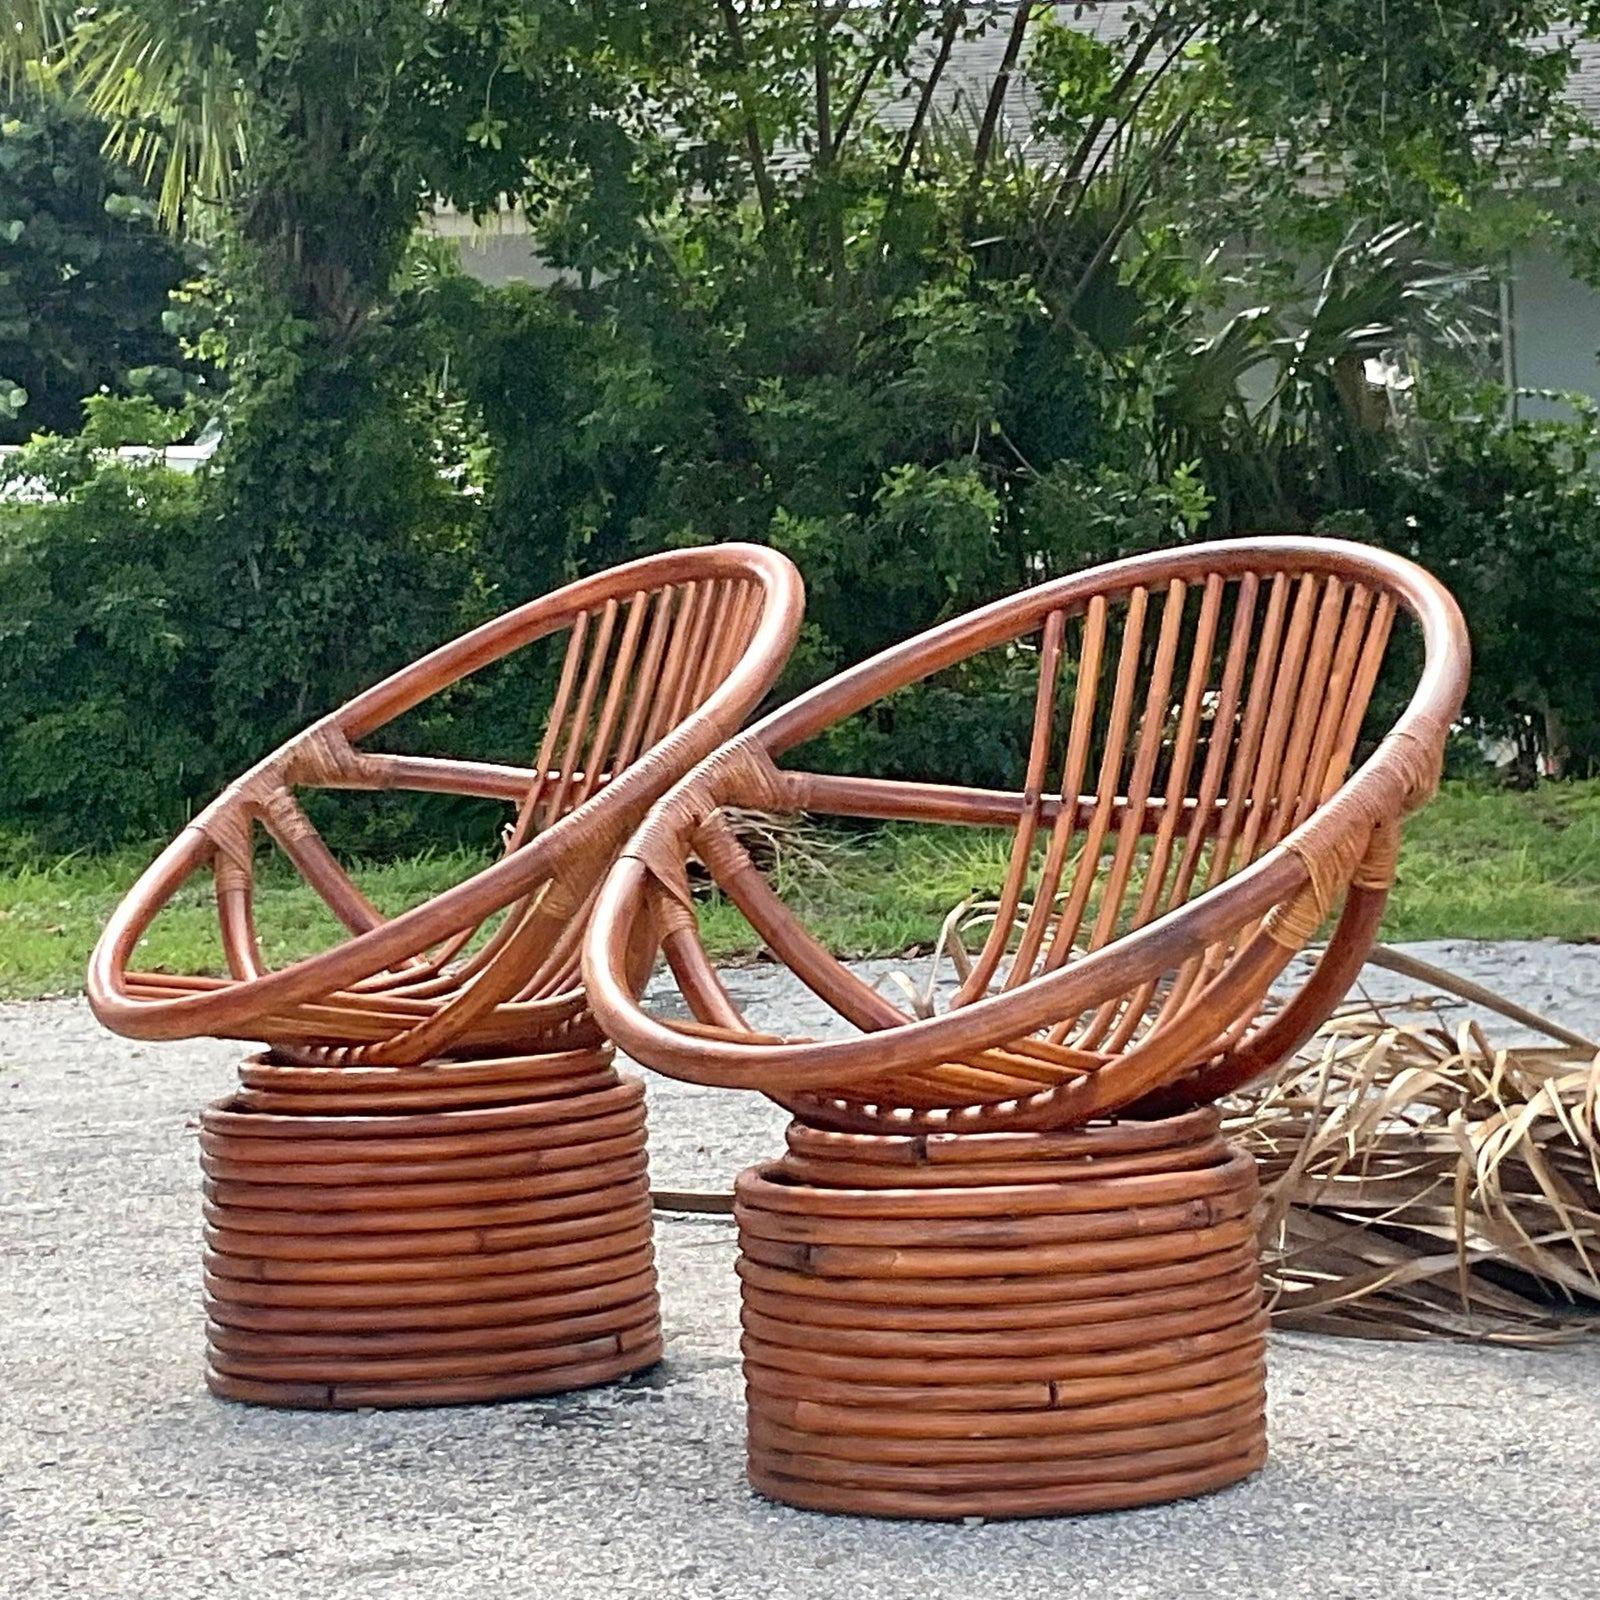 A fabulous pair of vintage Coastal swivel chairs. A chic bent rattan in a hoop design. A rich cinnamon brown finish. Acquired from a Palm Beach estate.